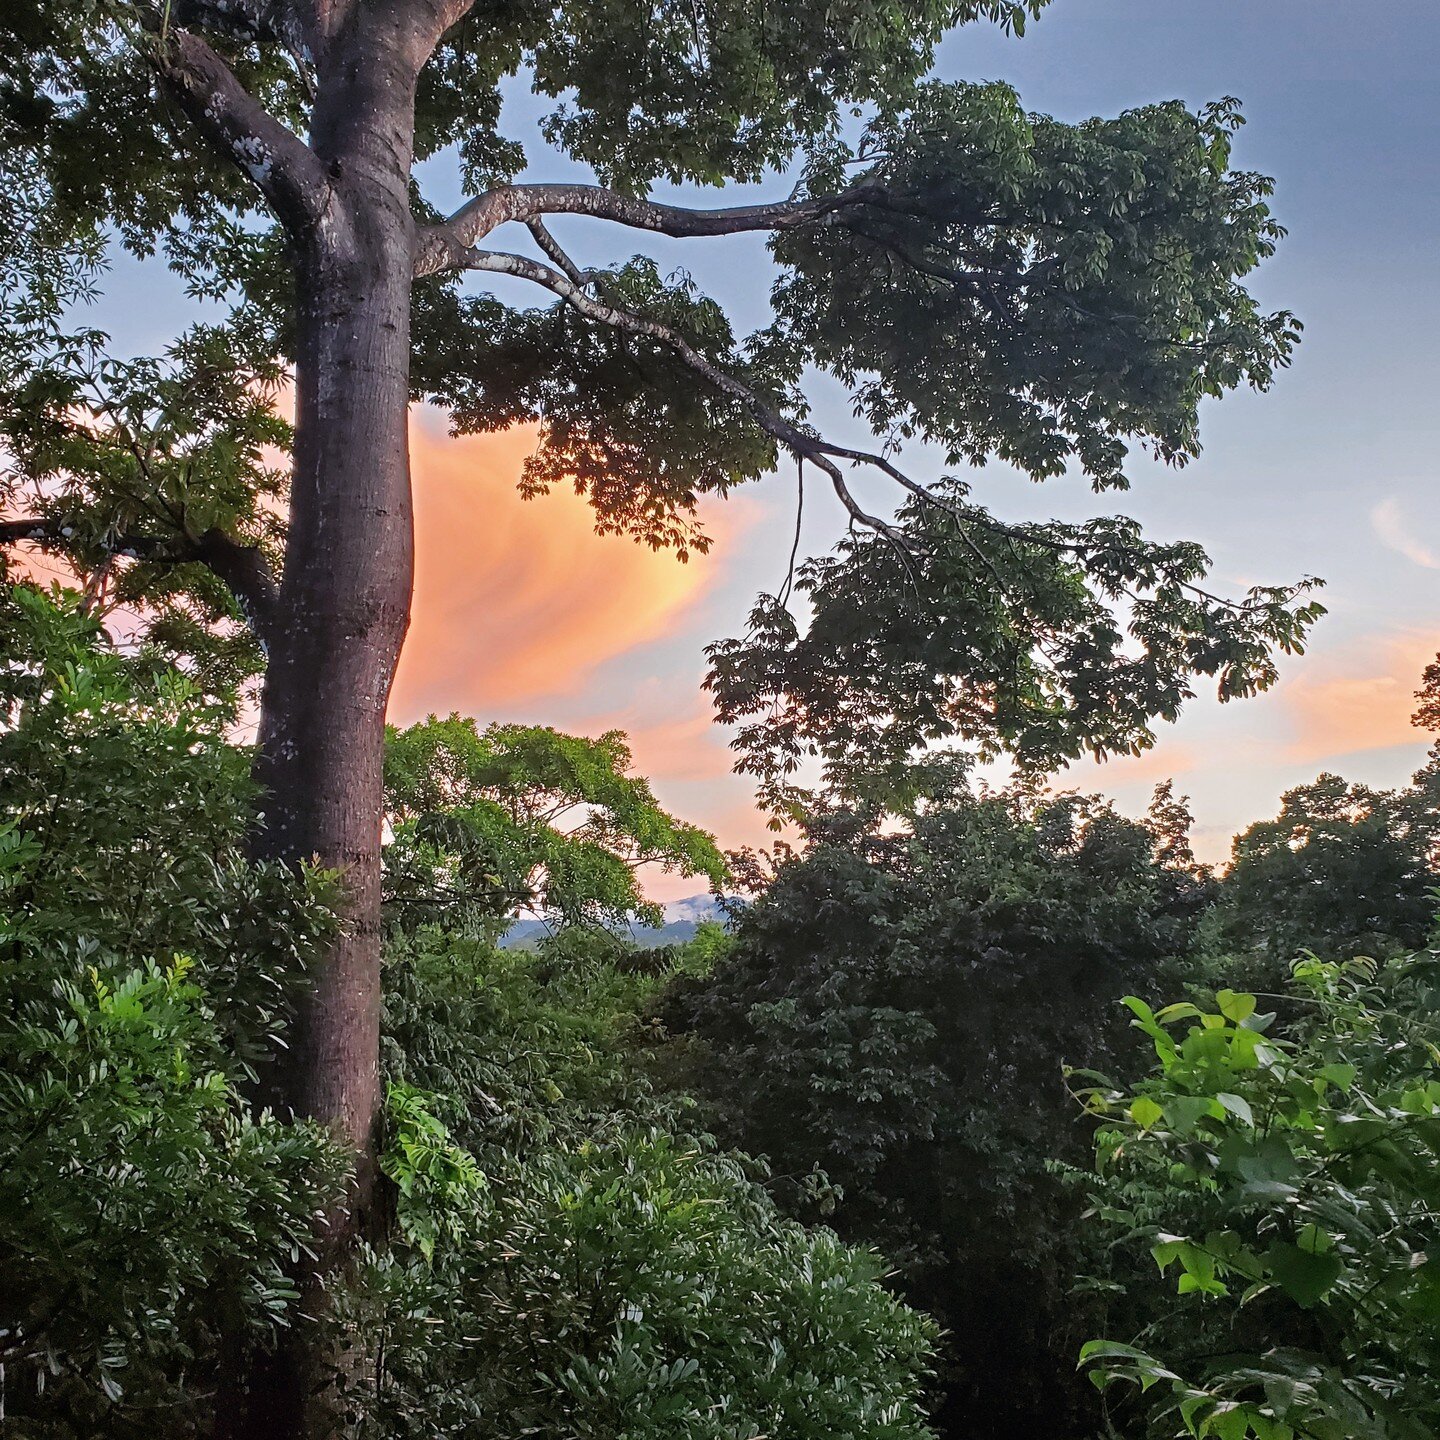 One of our favorite trees @casitaom is also popular with the green quaker parrots; they like to nest and sit in this tree. This photo was taken at sunrise. The colors of the sky from Casa Om are amazing. The sounds of the jungle wake us up and lull u